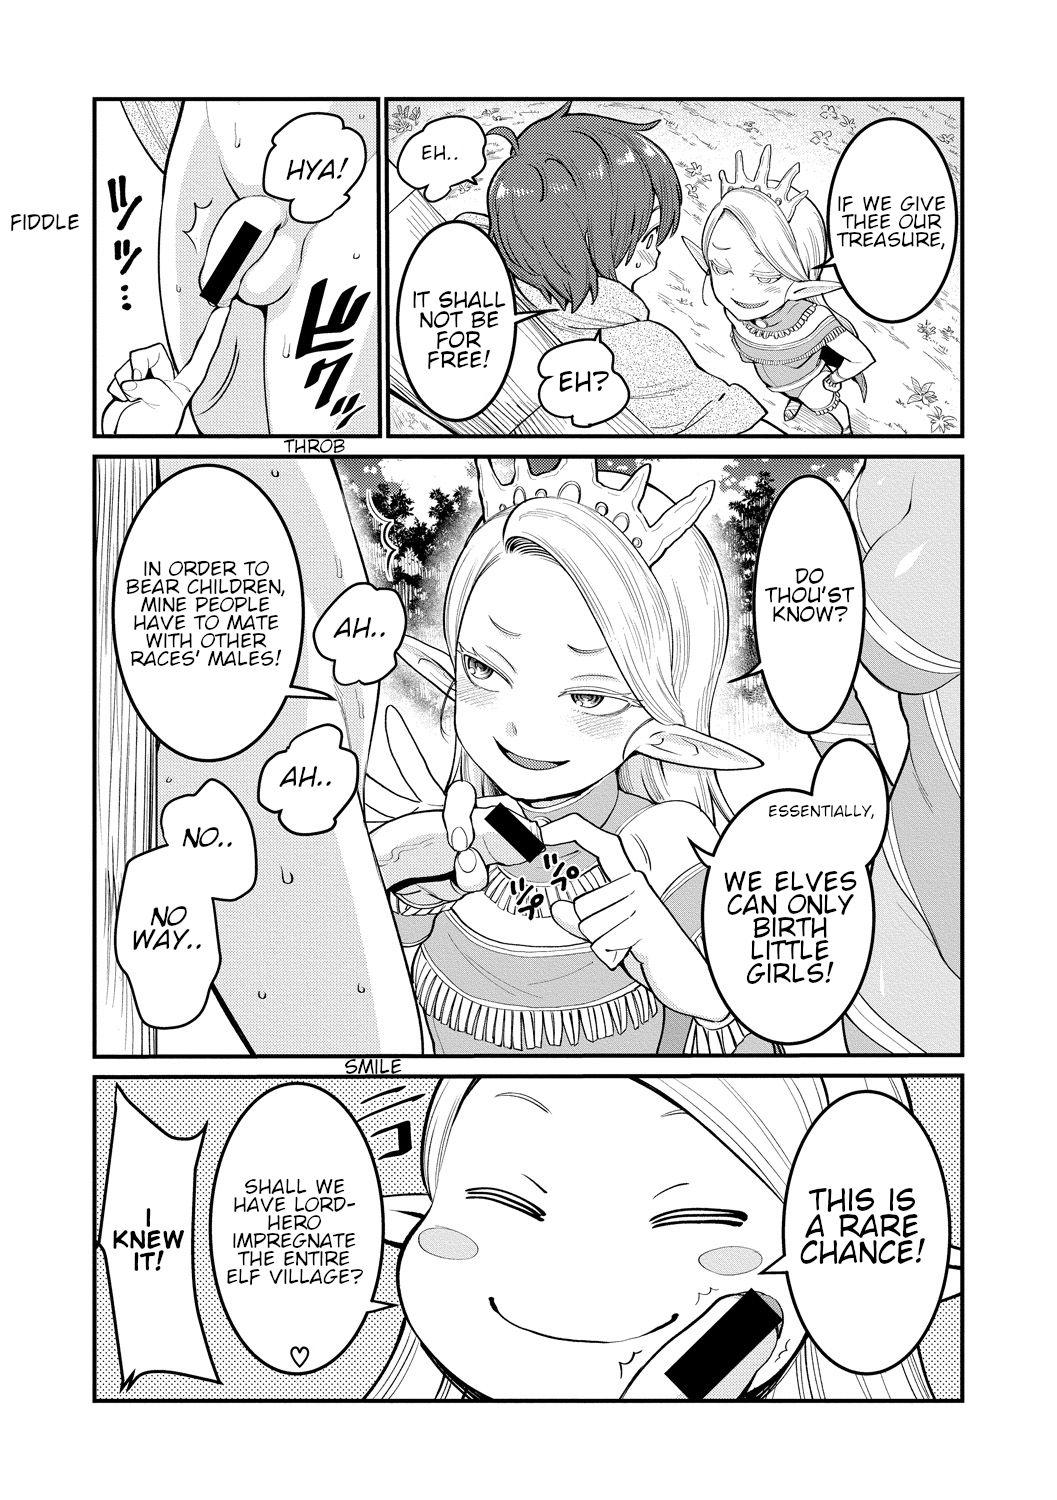 Chacal Chintore Quest II: Shota Yuusha Elf no Sato de Dai Rankou | Chintore Quest II: Shota Hero and the Great Elf Village Orgy Whooty - Page 8